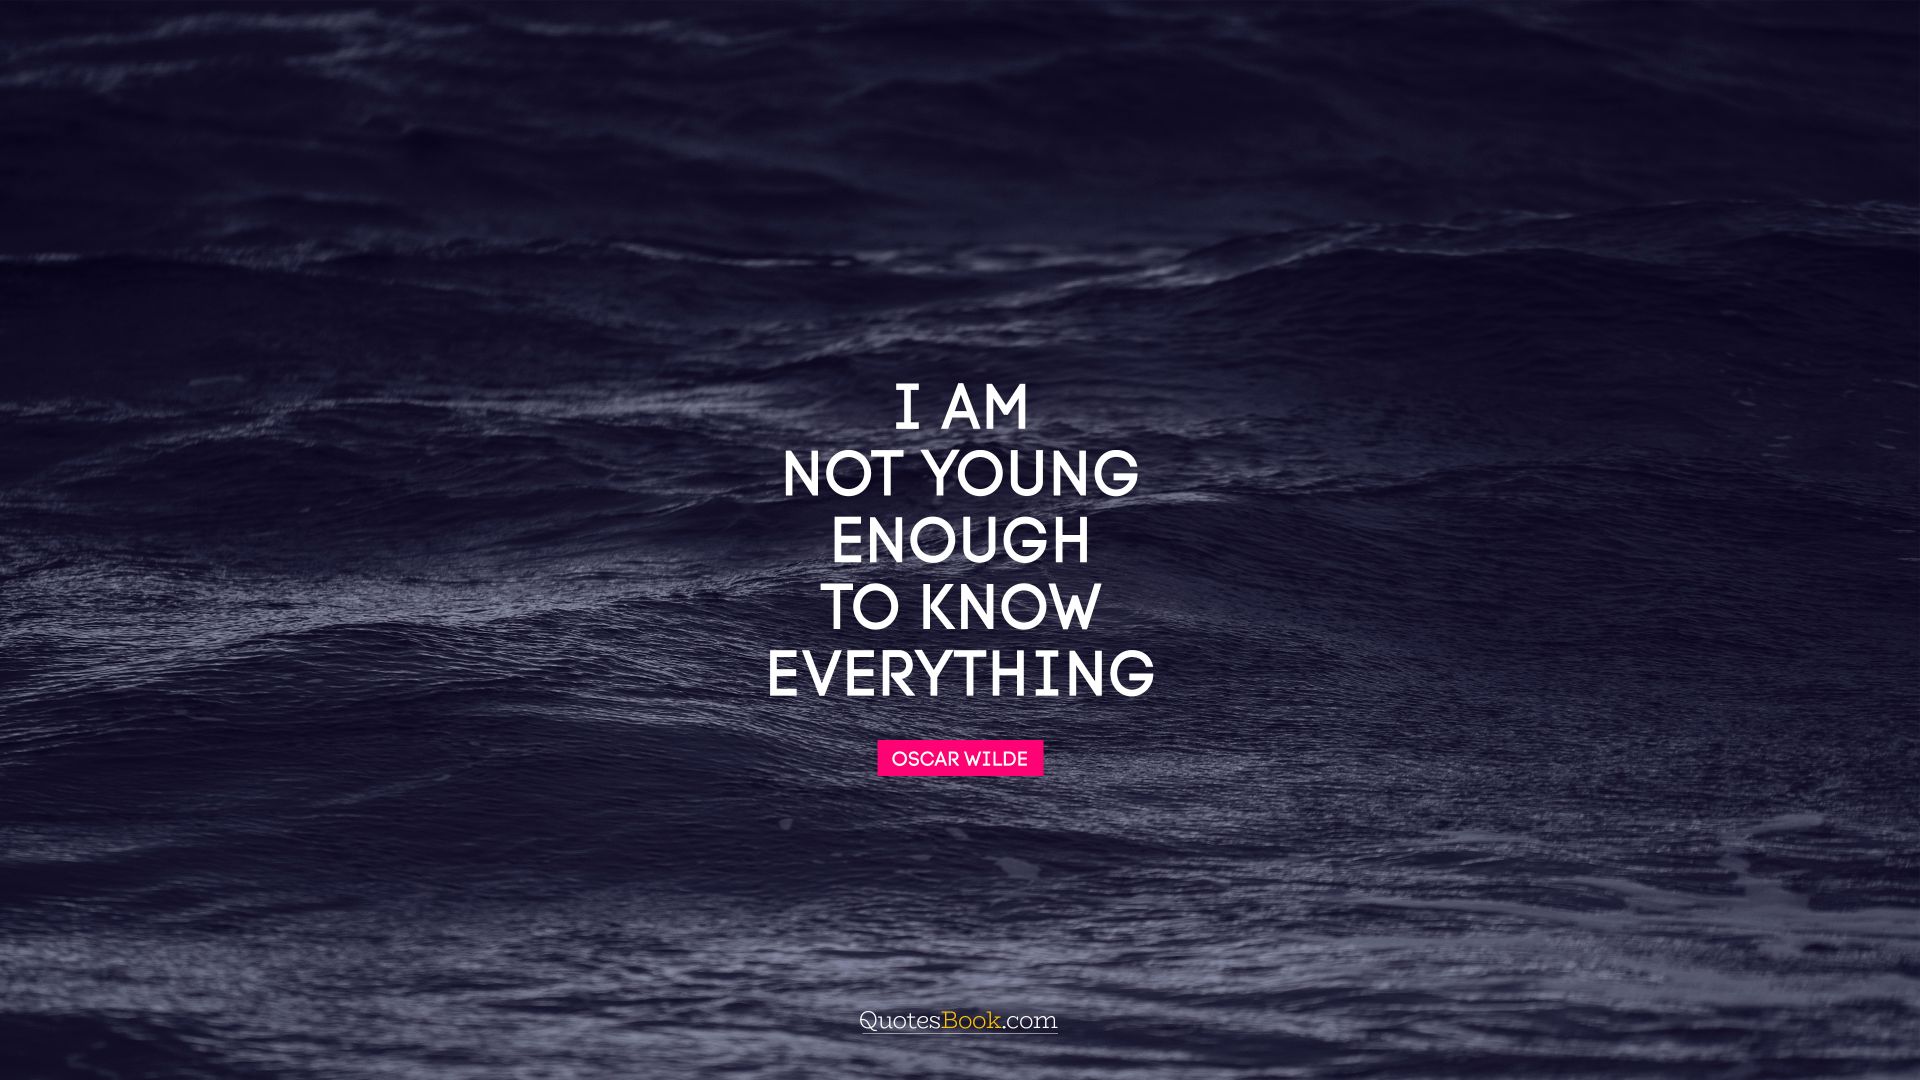 I am not young enough to know everything. - Quote by Oscar Wilde